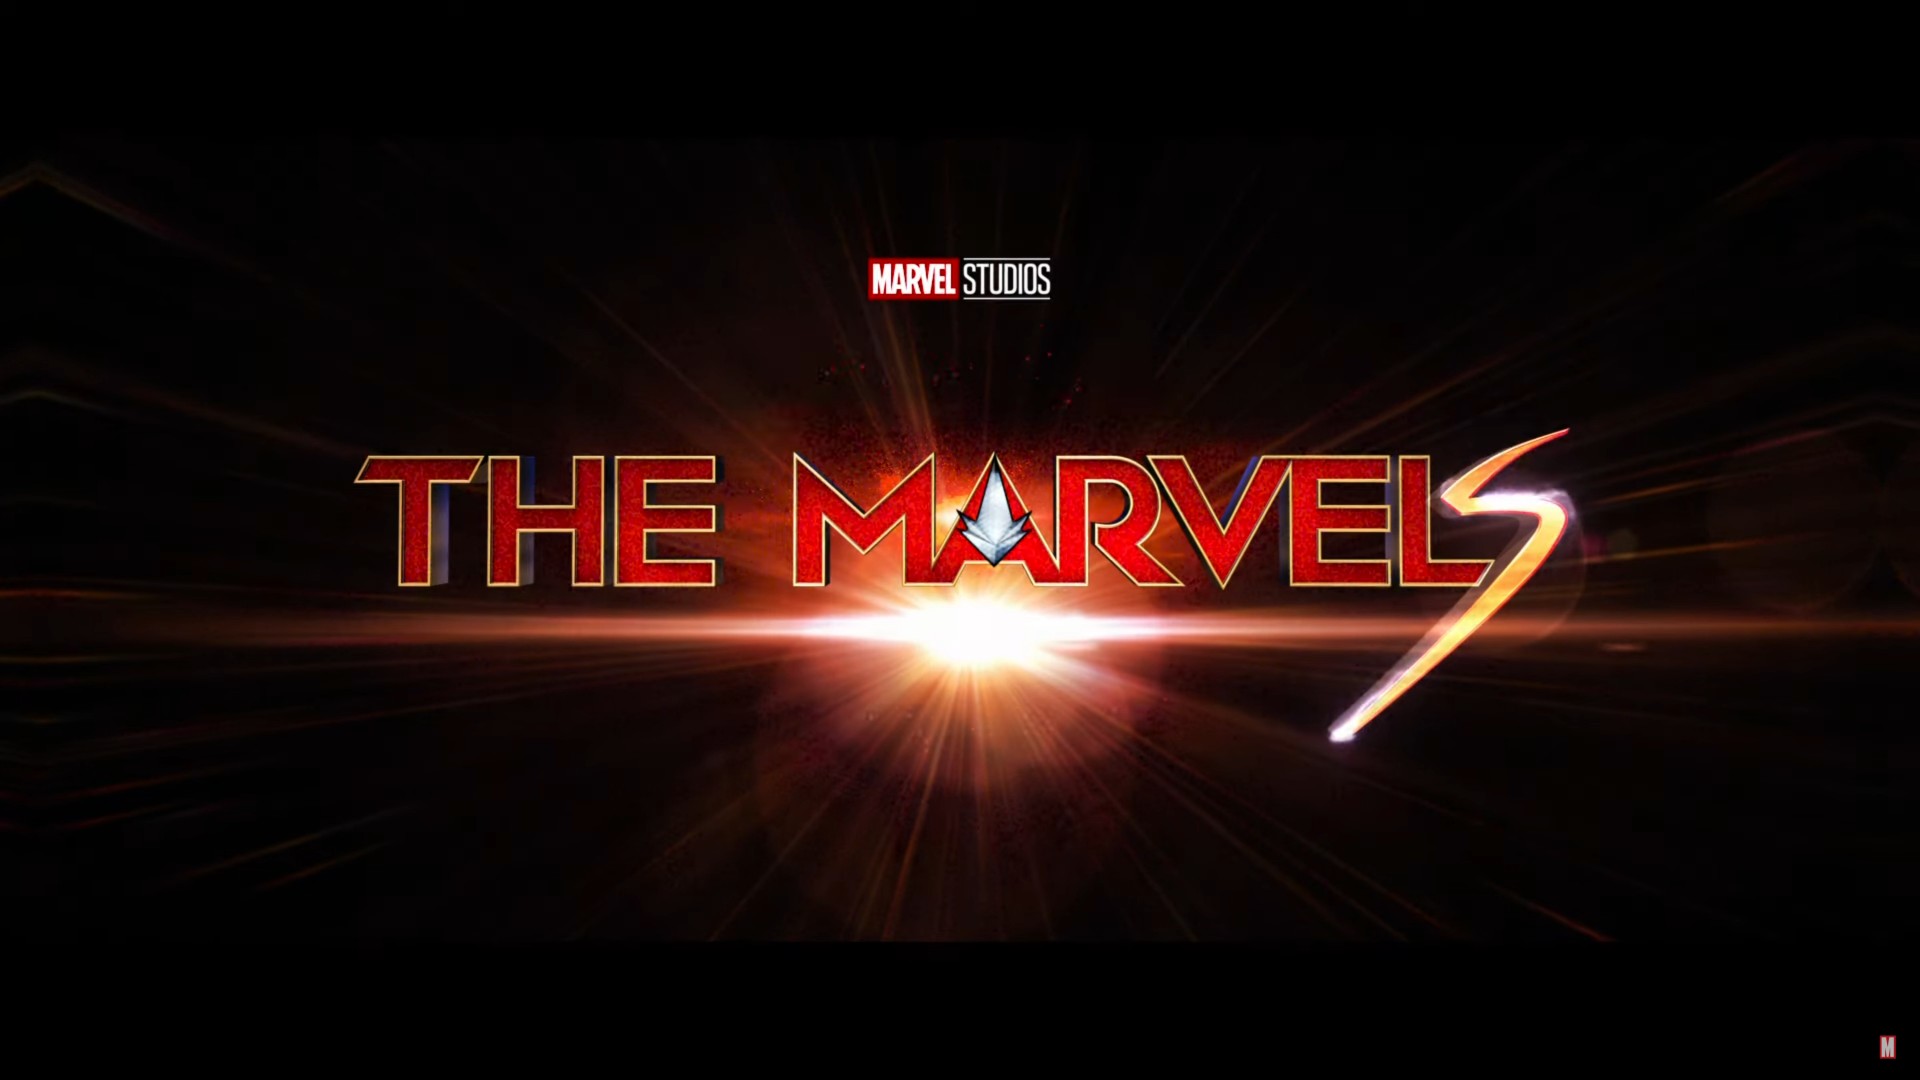 Captain Marvel 2 is officially titled The Marvels